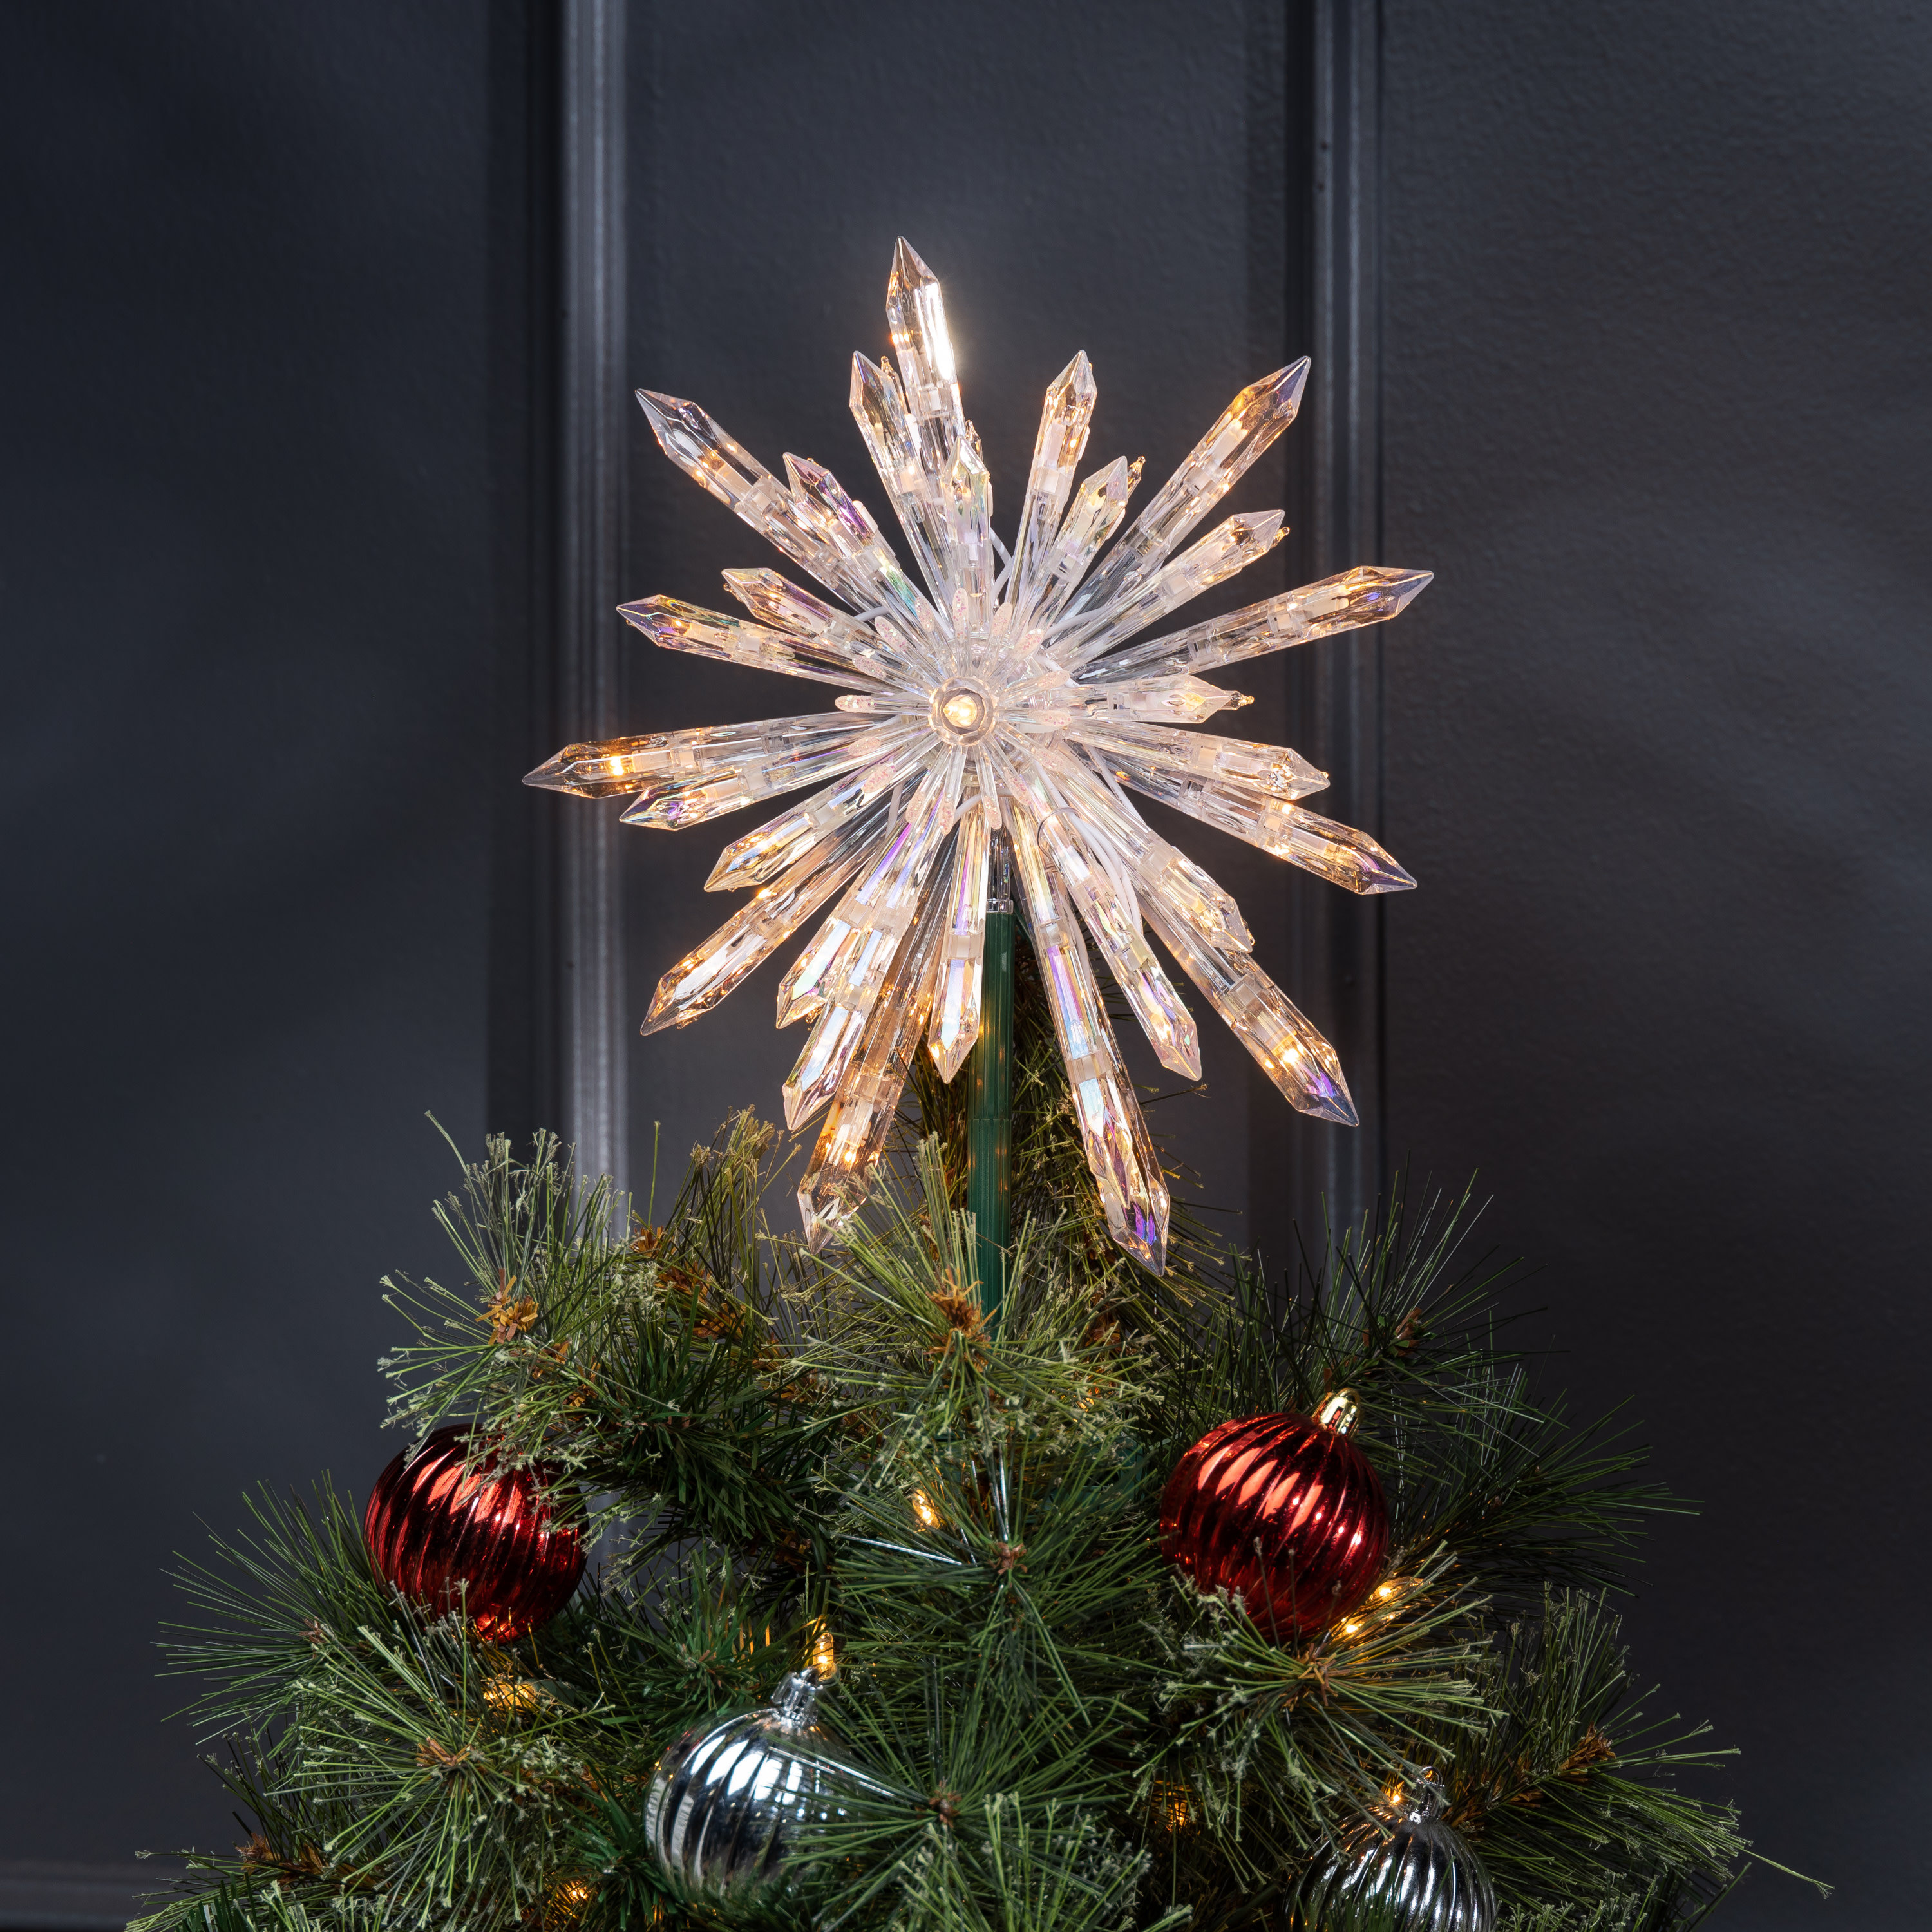 14 Lighted Iridescent Icicle Christmas Tree Topper - Clear Lights